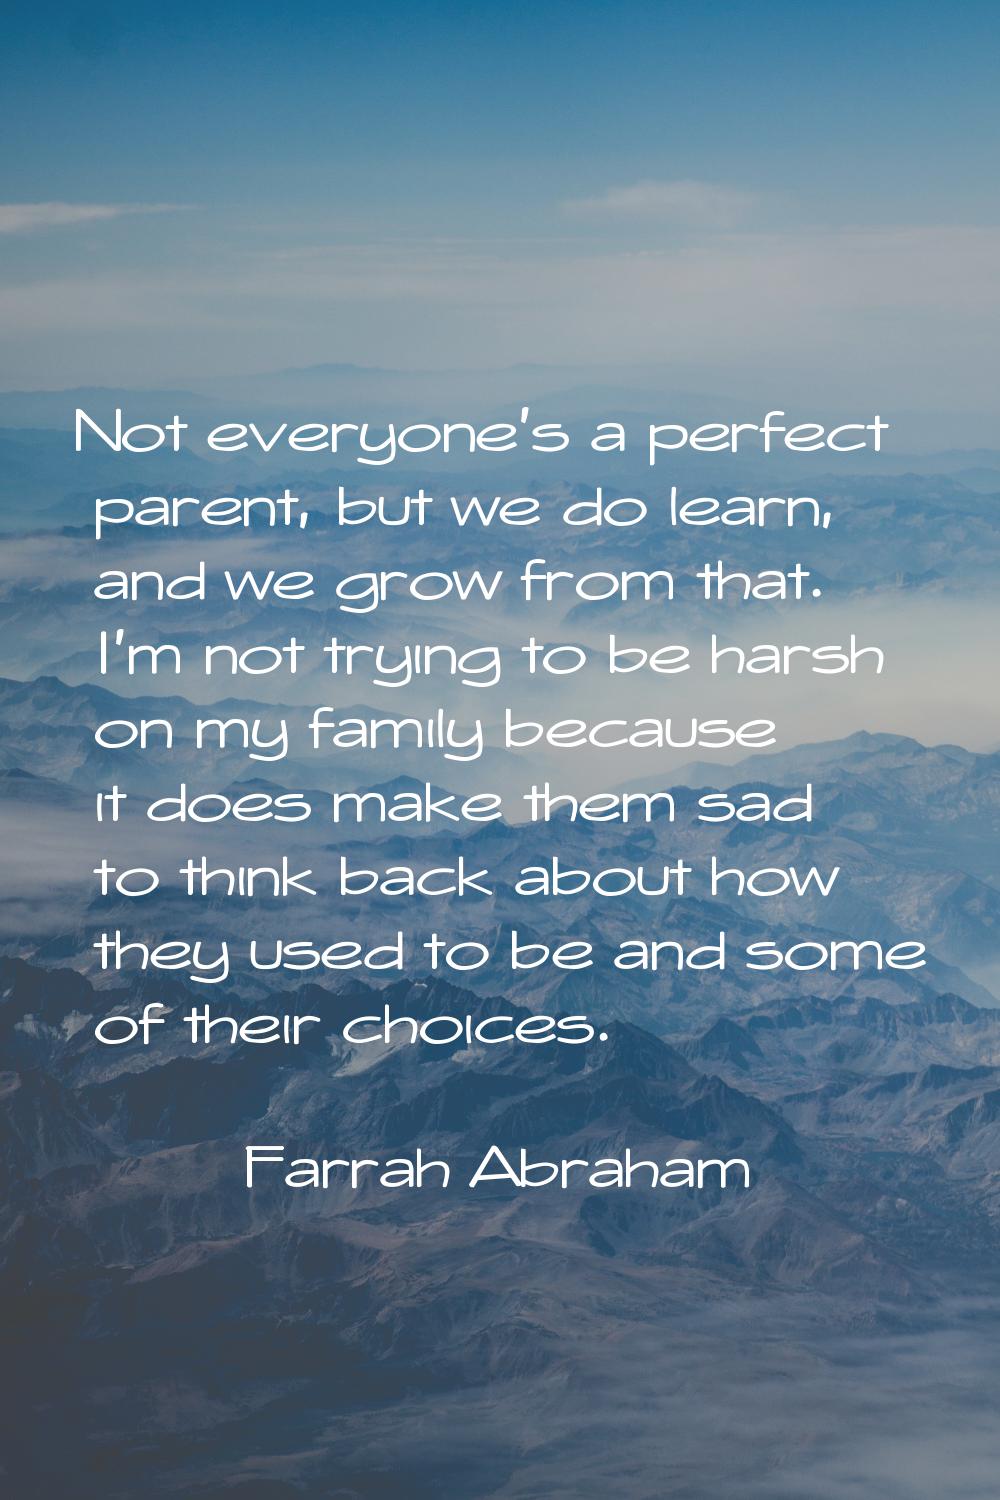 Not everyone's a perfect parent, but we do learn, and we grow from that. I'm not trying to be harsh